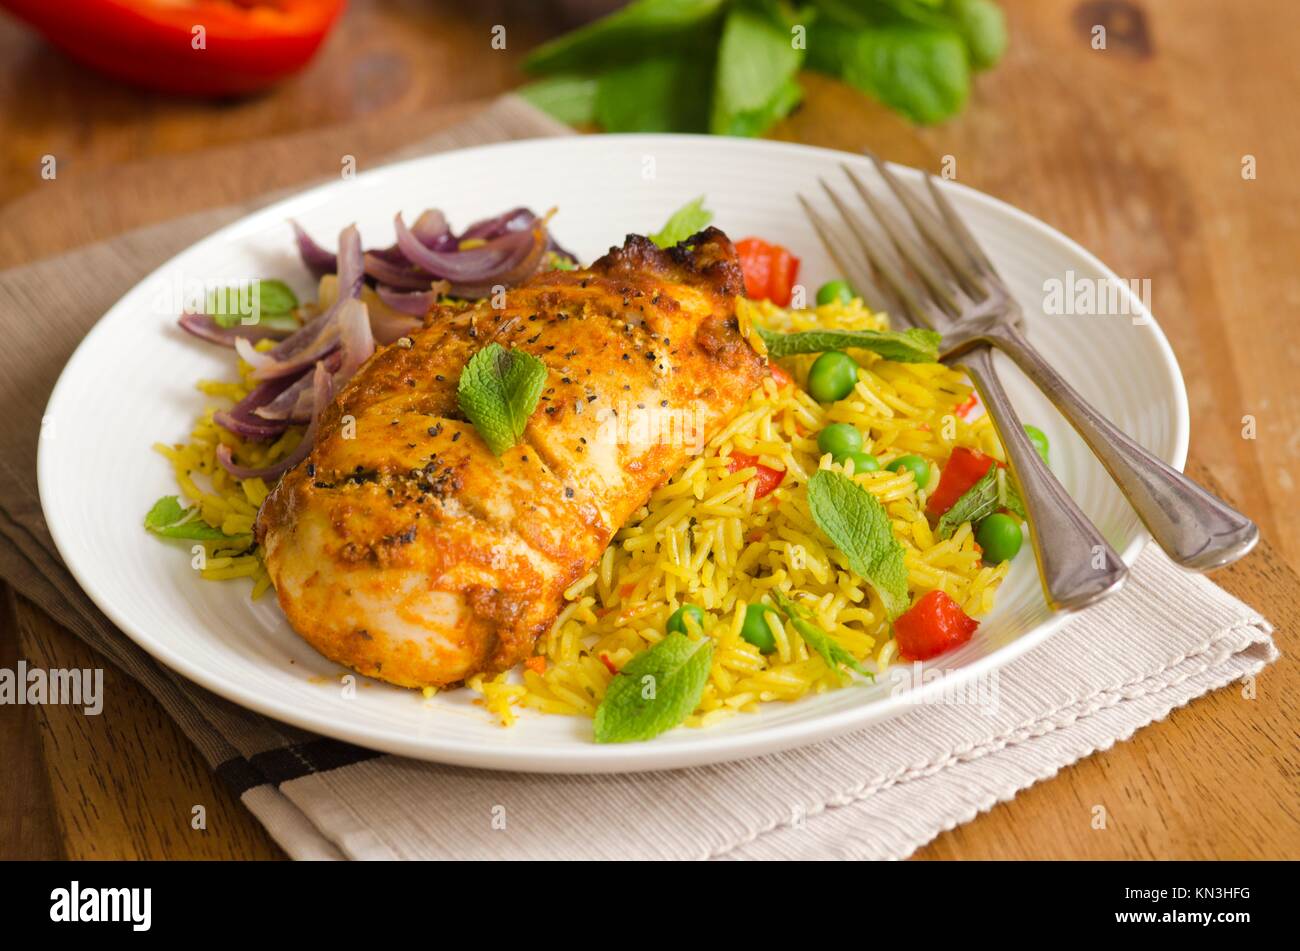 Chicken tikka with spiced rice, red onions and mint. Stock Photo